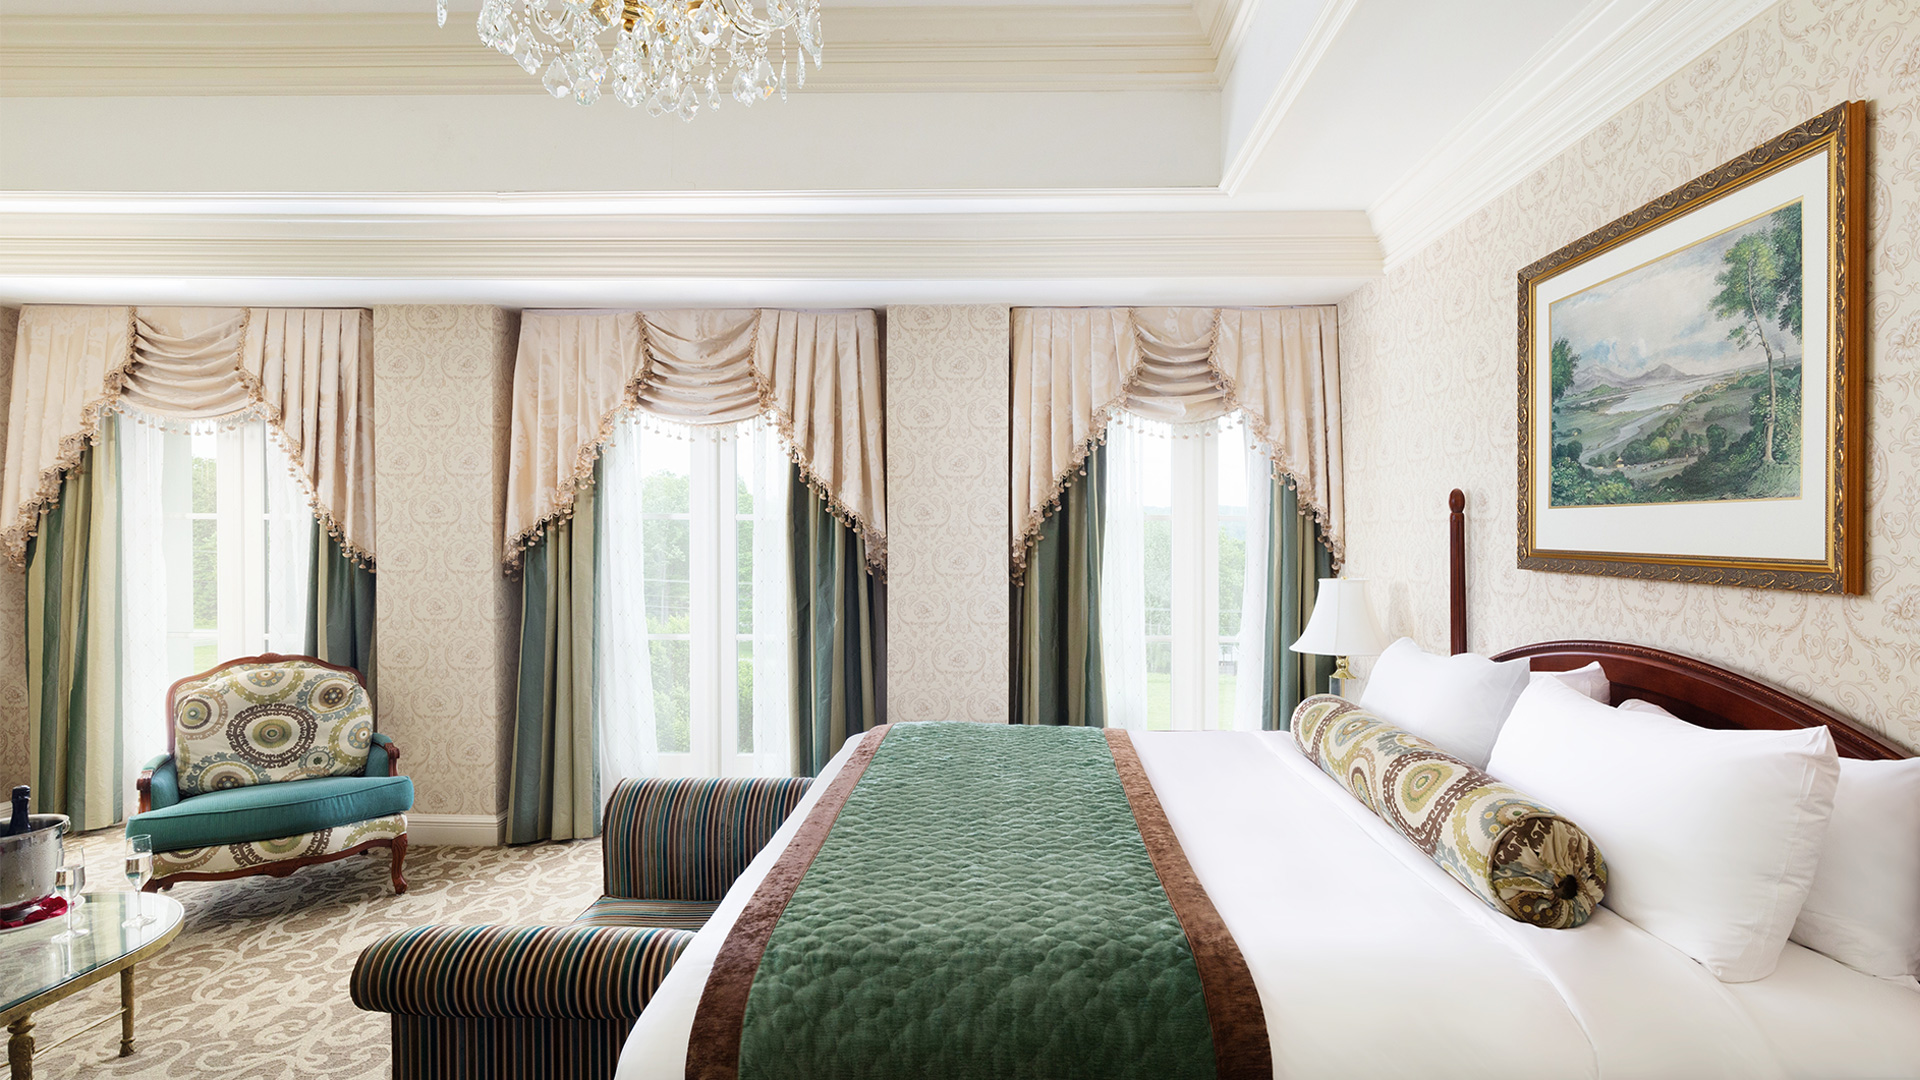 interior shot of The Chateau's Junior King Suite bedroom. There is a king bed with green and white linens with a sitting bench on the end of the bed. There is a sitting area and three large windows overlooking the resort grounds.